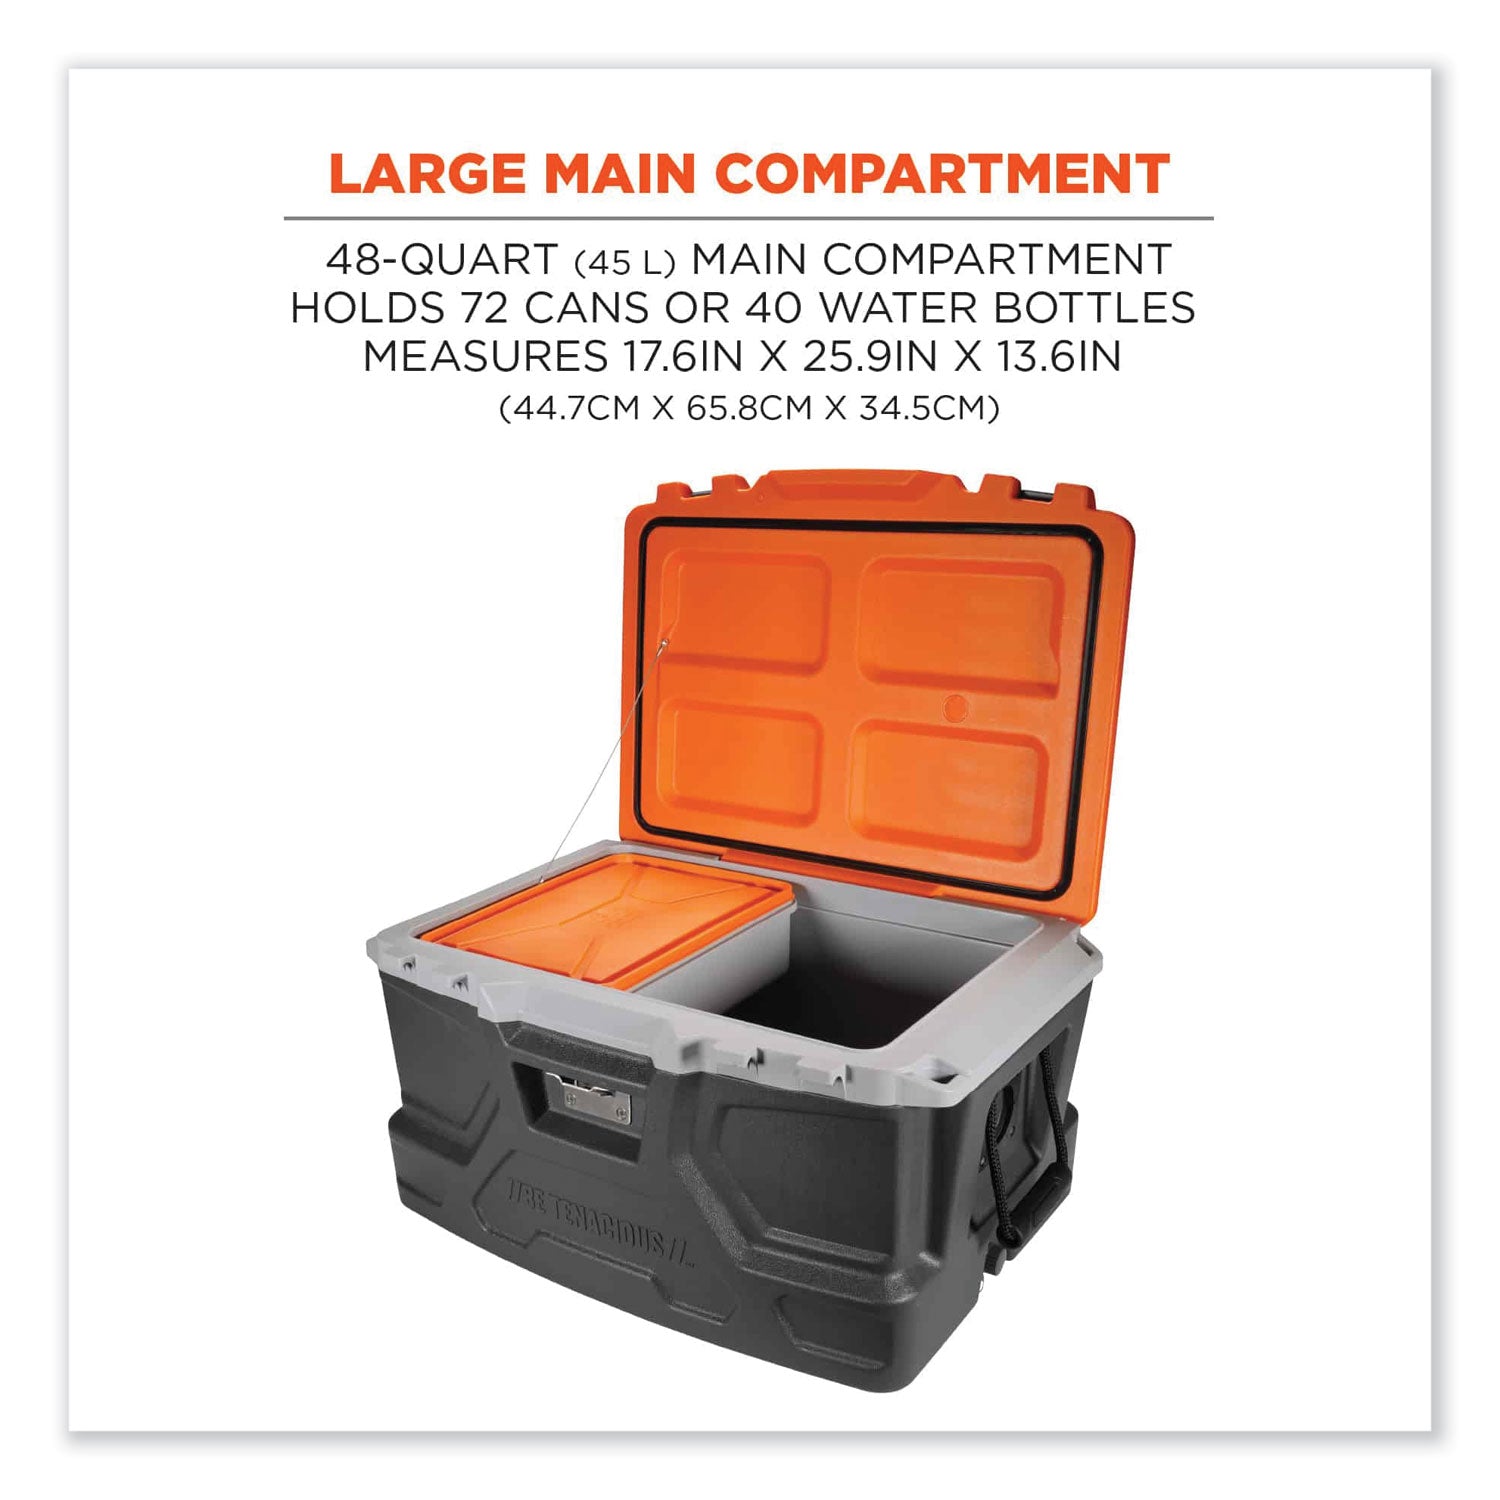 chill-its-5171-48-quart-industrial-hard-sided-cooler-orange-gray-20-pallet-ships-in-1-3-business-days_ego13173 - 3